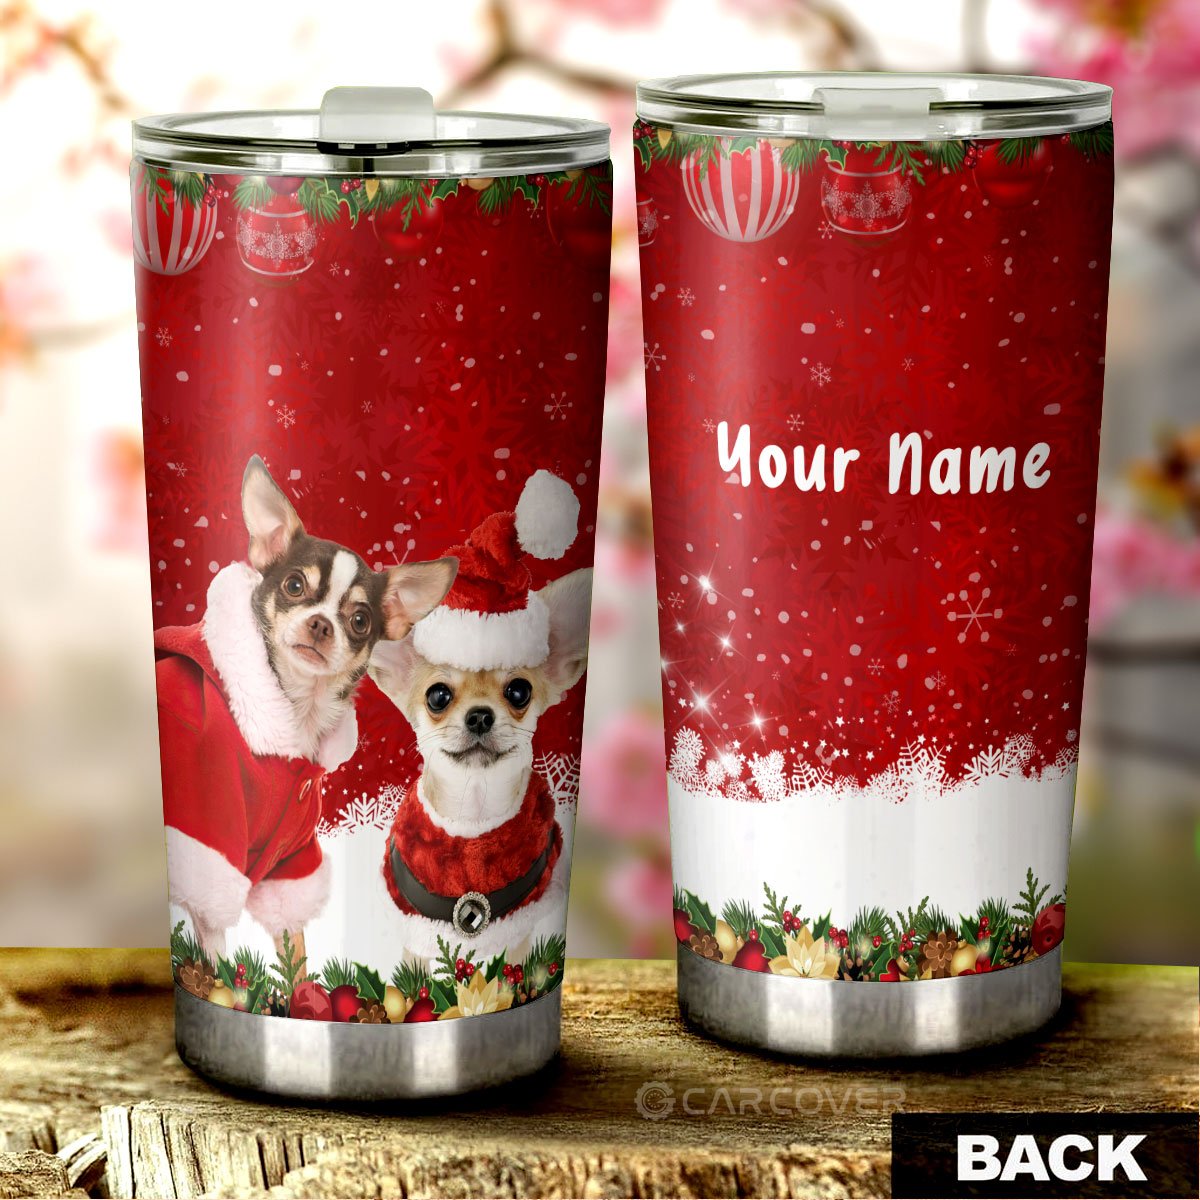 Chihuahuas Christmas Tumbler Cup Custom Car Accessories For Dog Lovers - Gearcarcover - 1